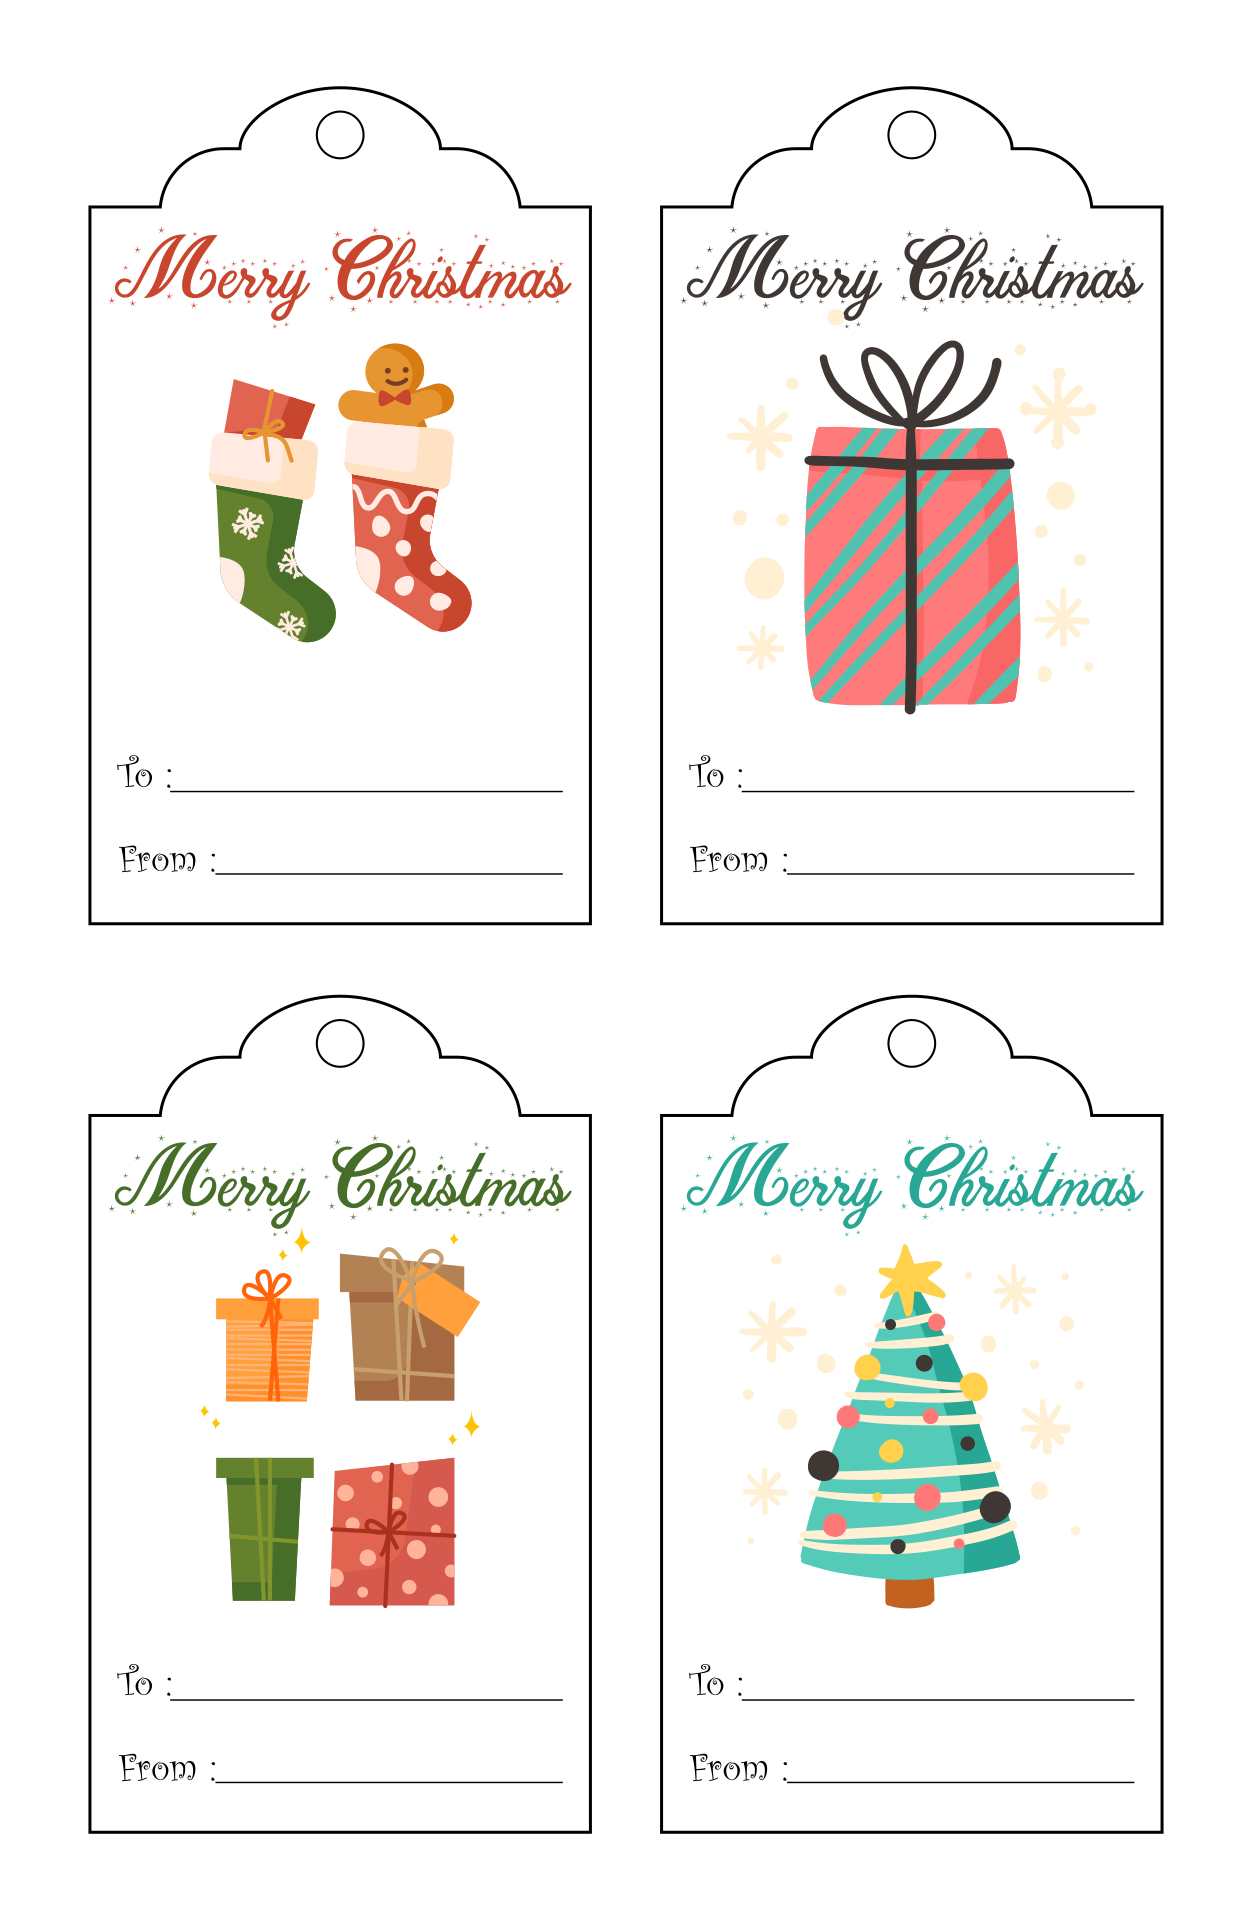 7 Best Images of Blank Christmas Gift Tag Sticker Printable Printable